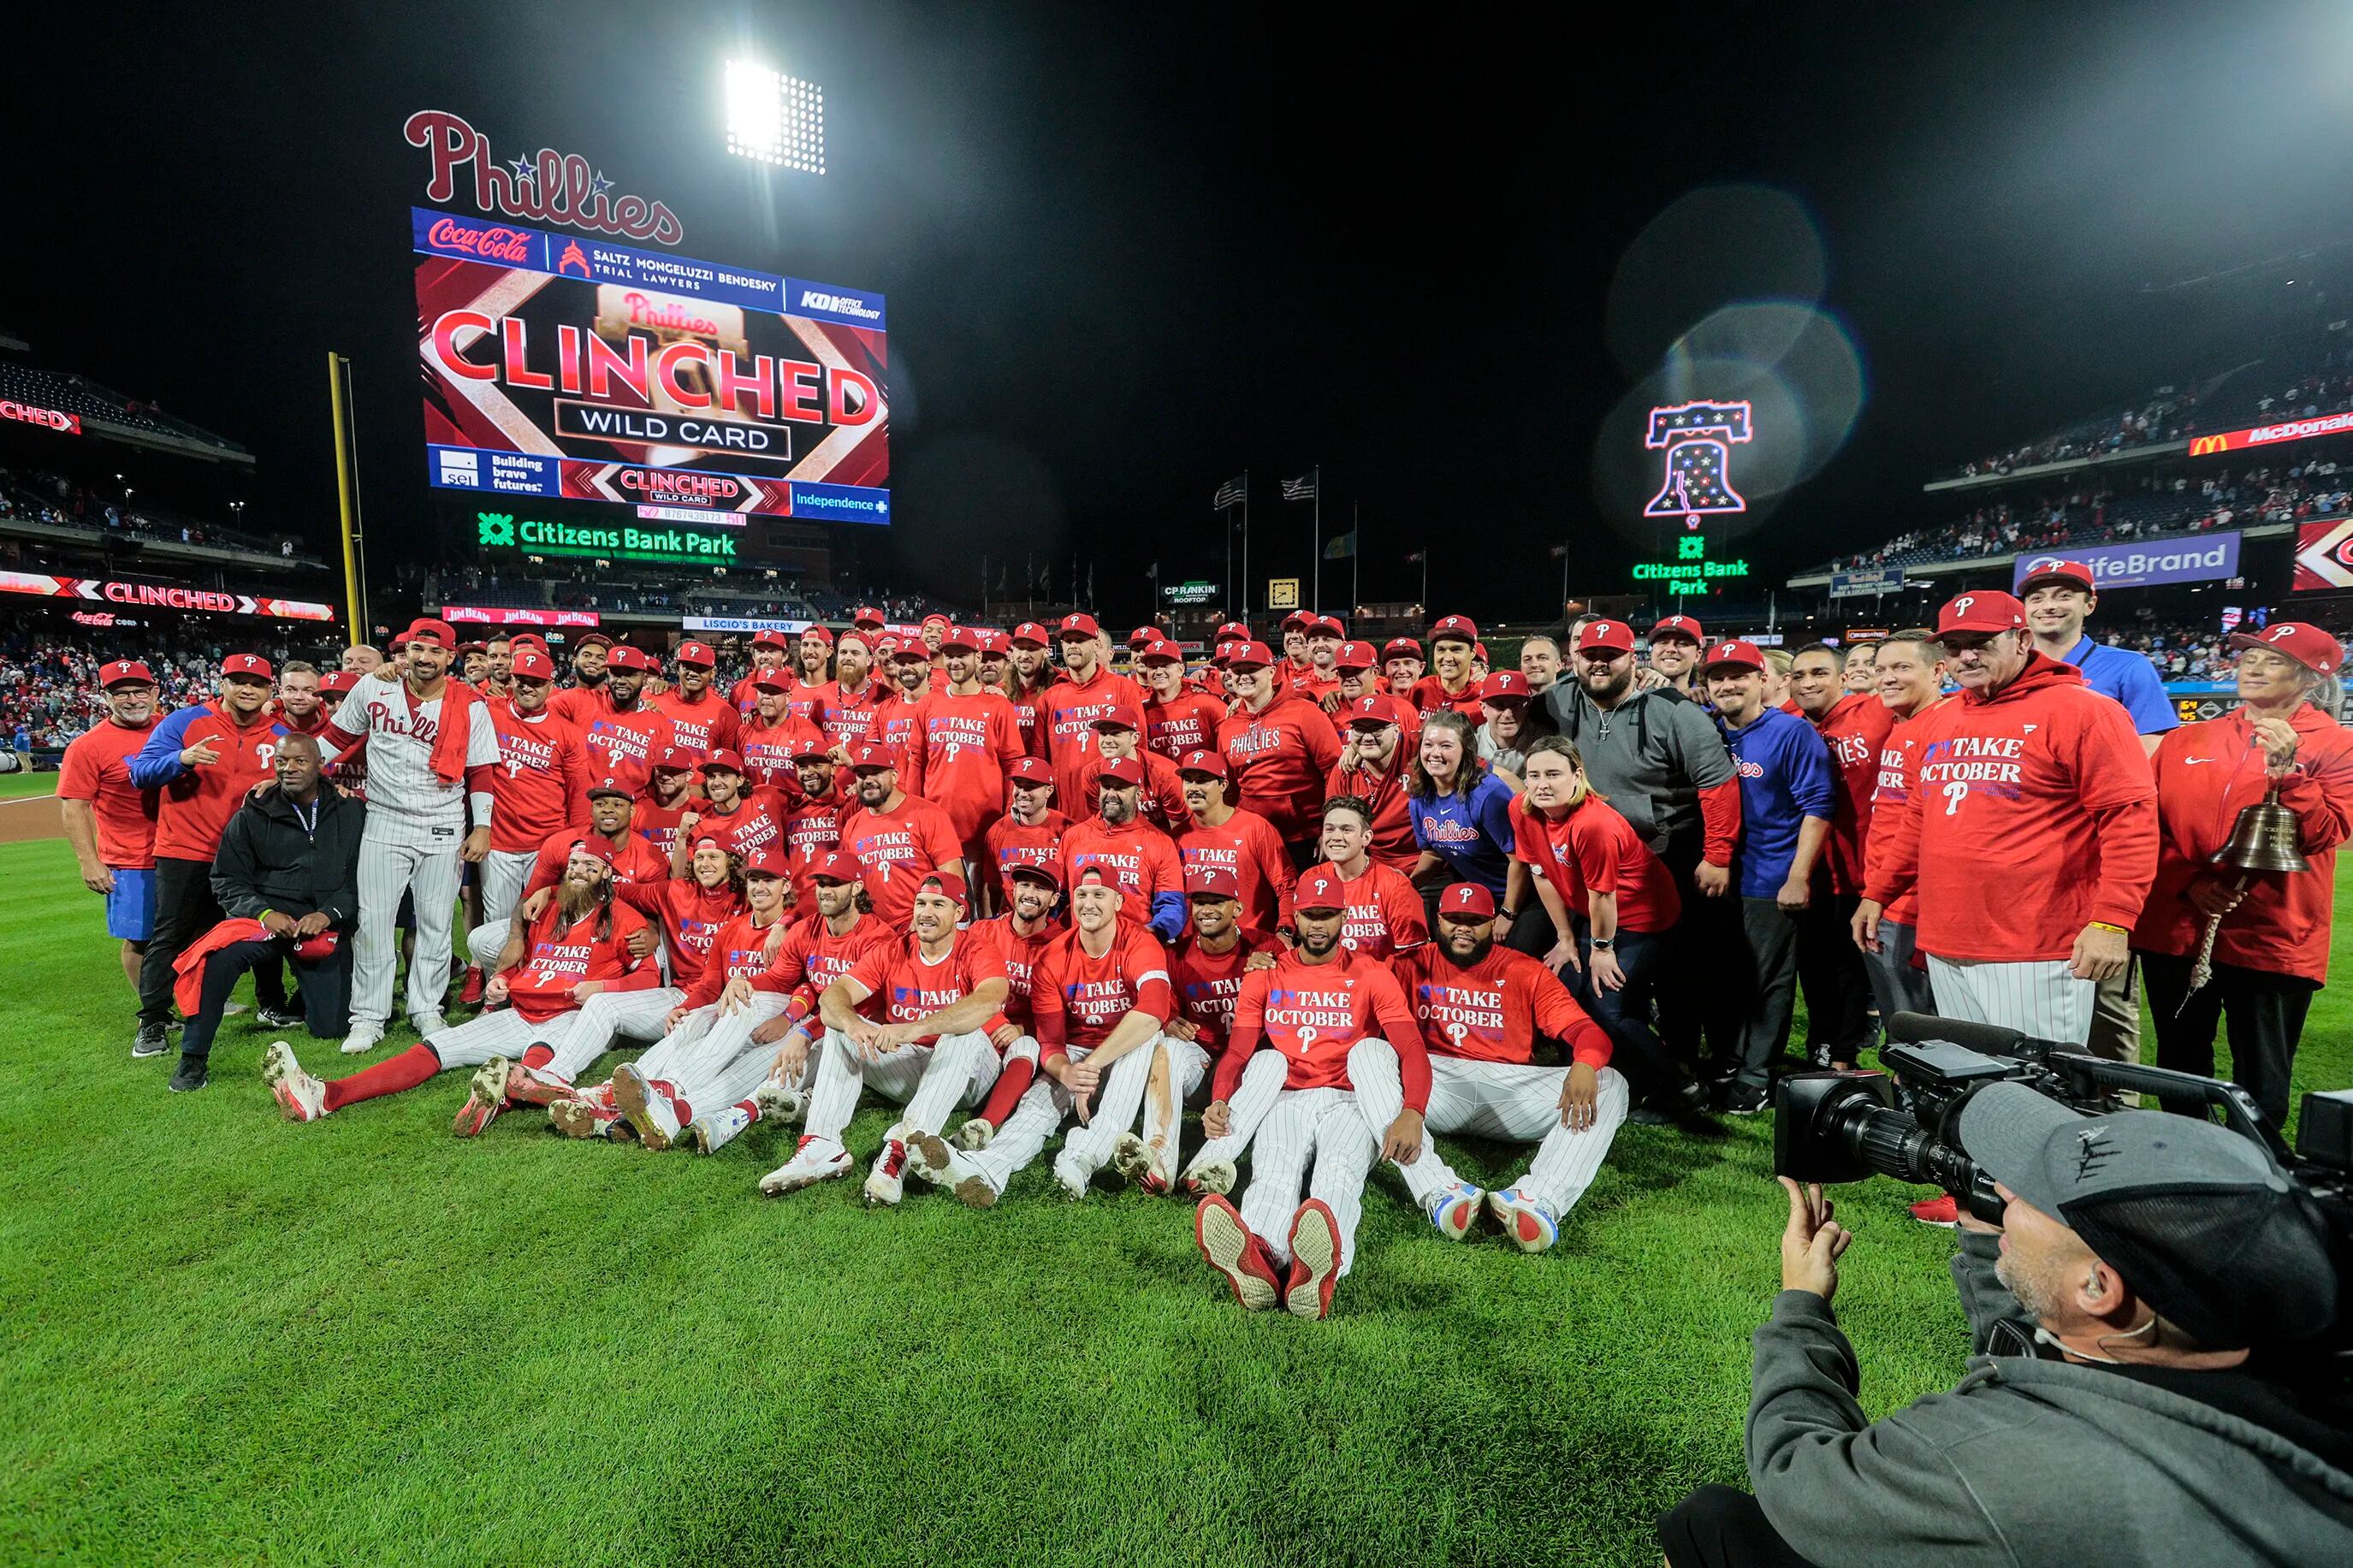 Photo: Phillies celebrate with champagne - PHI2009102115 